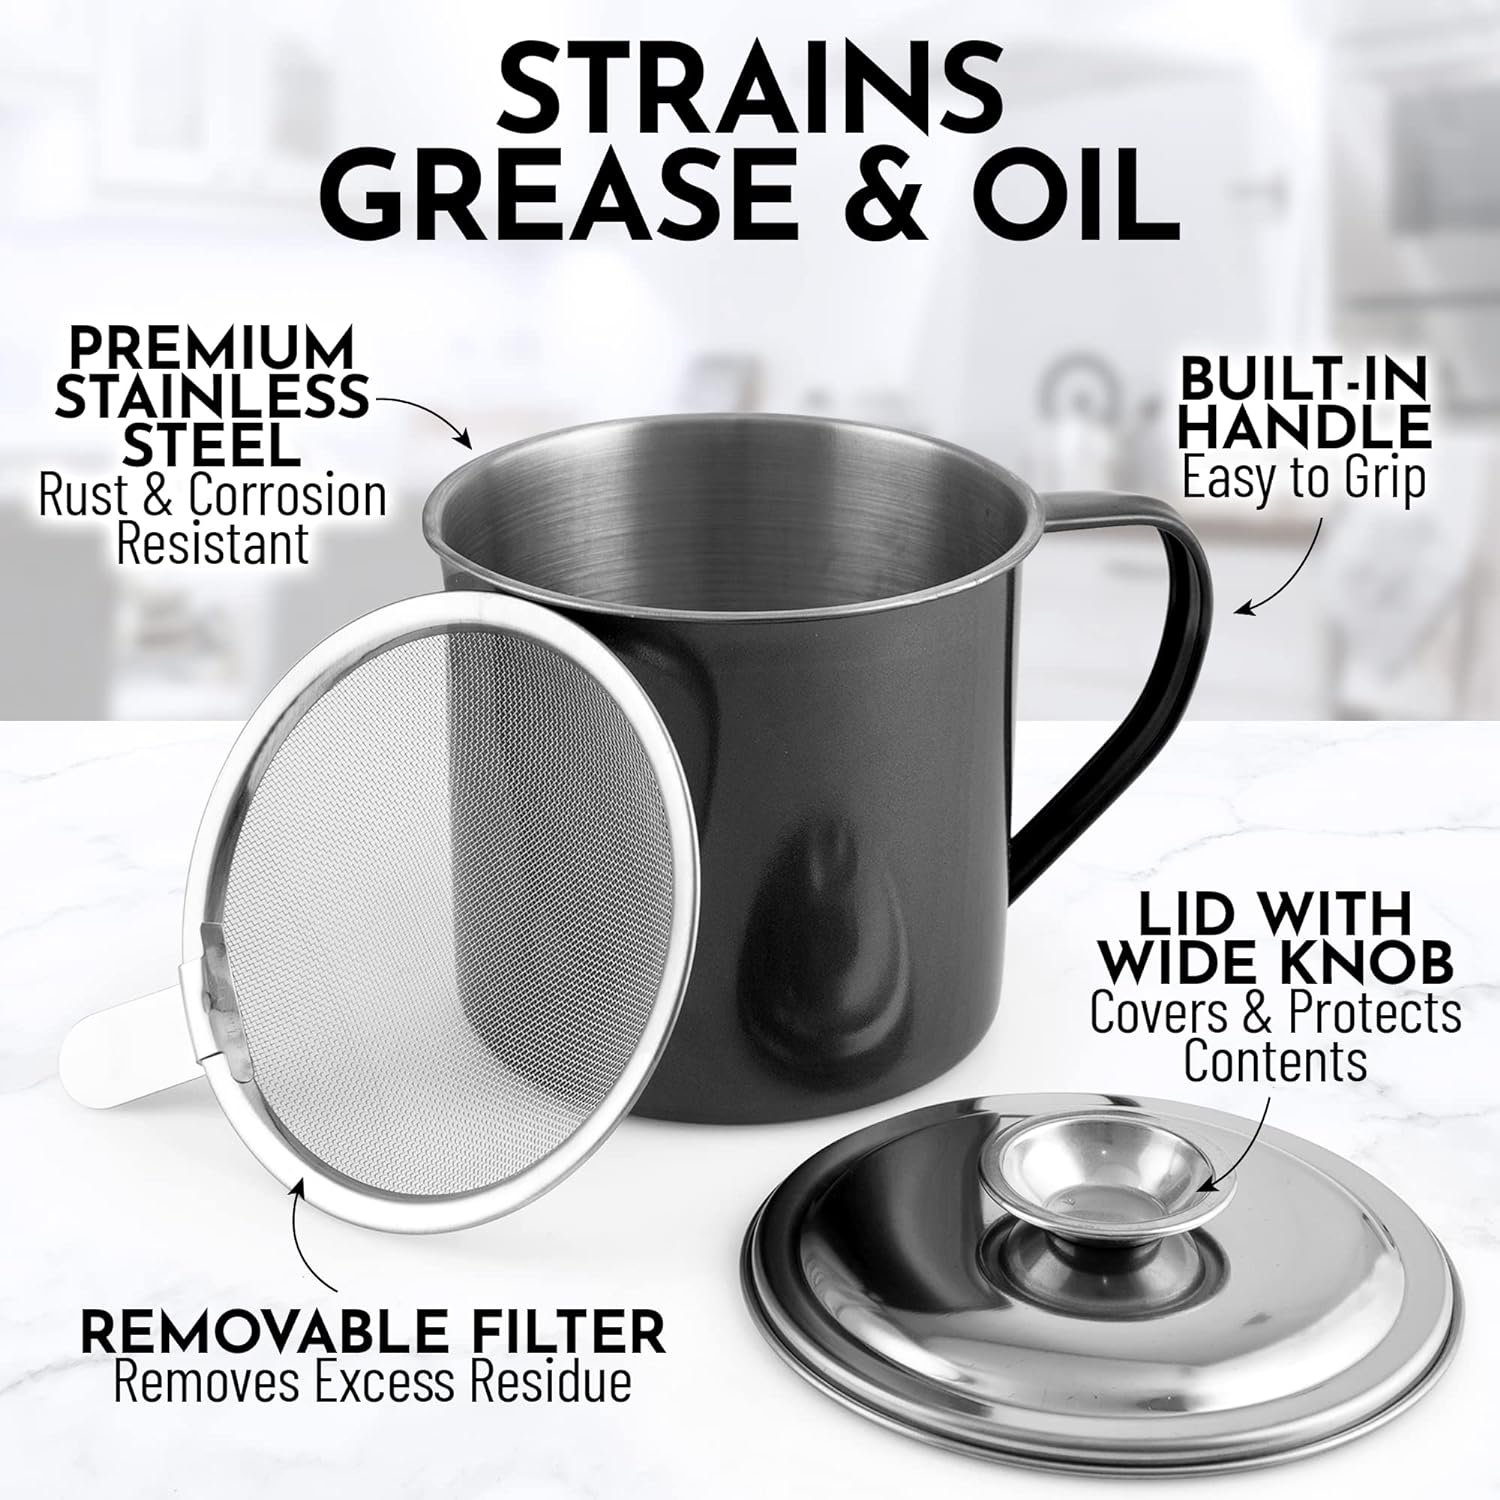 Residue Filter Oiler, Bacon Grease Saver With Strainer, Stainless